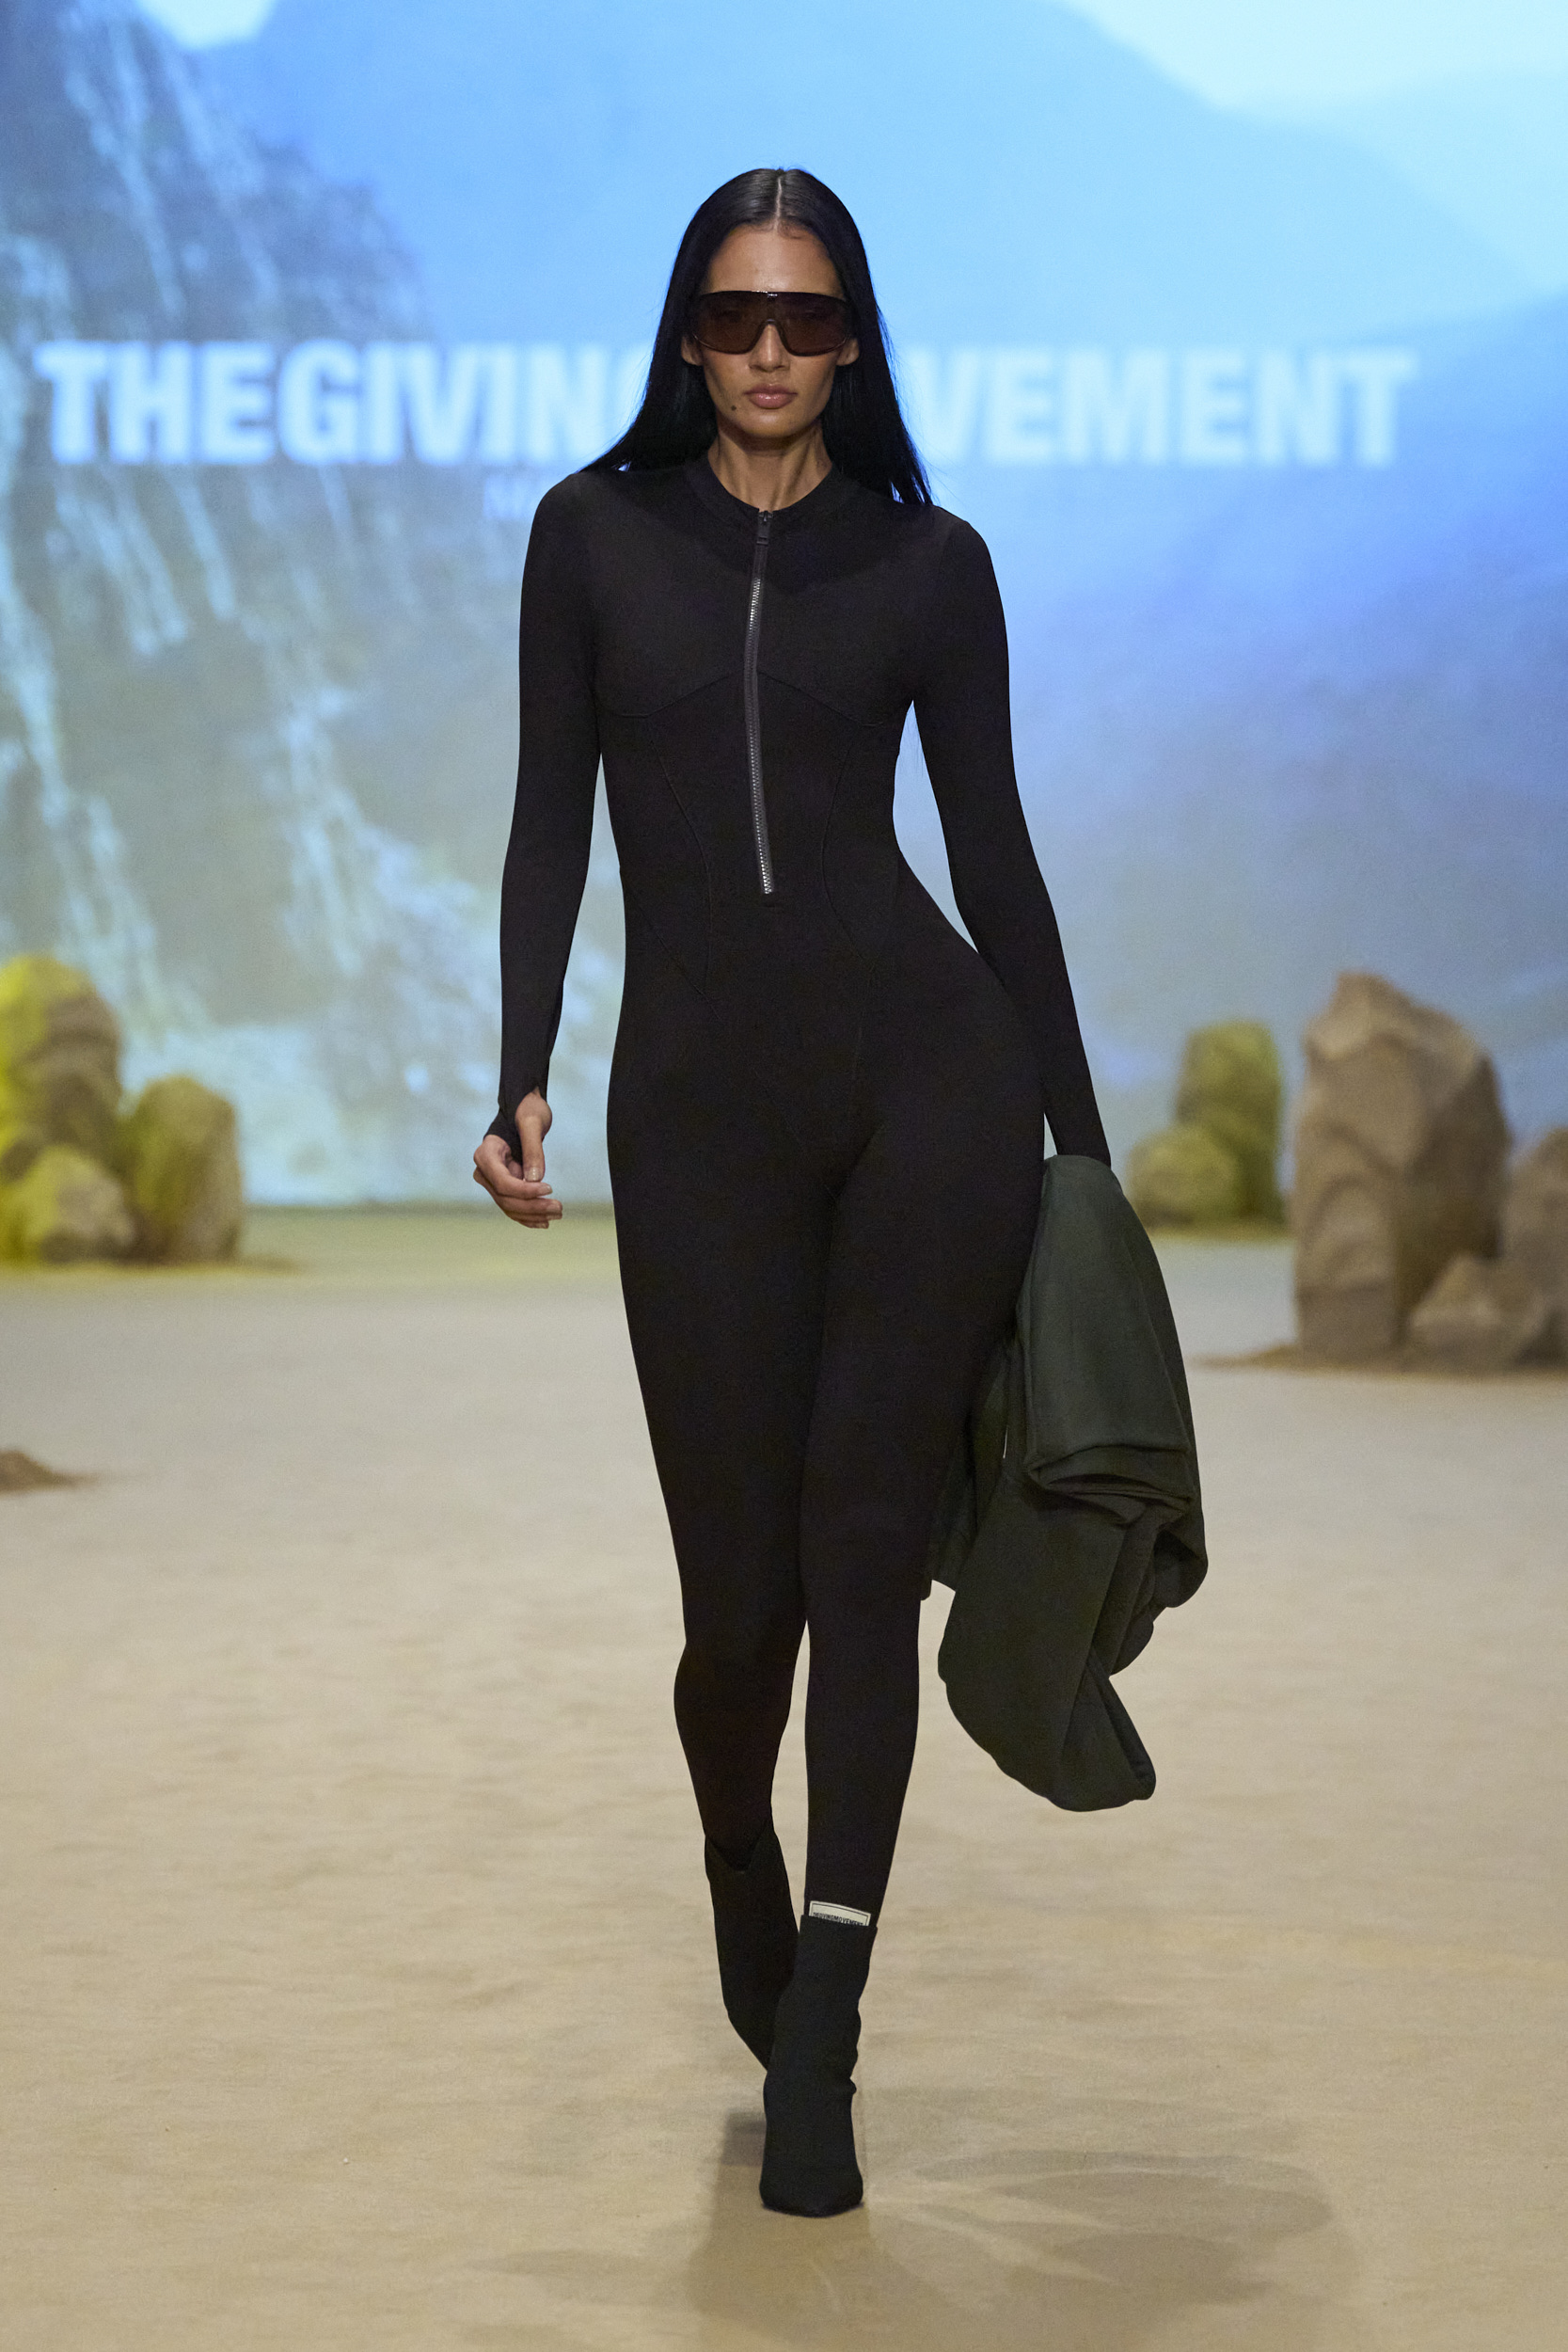 The Giving Movement Spring 2024 Fashion Show 